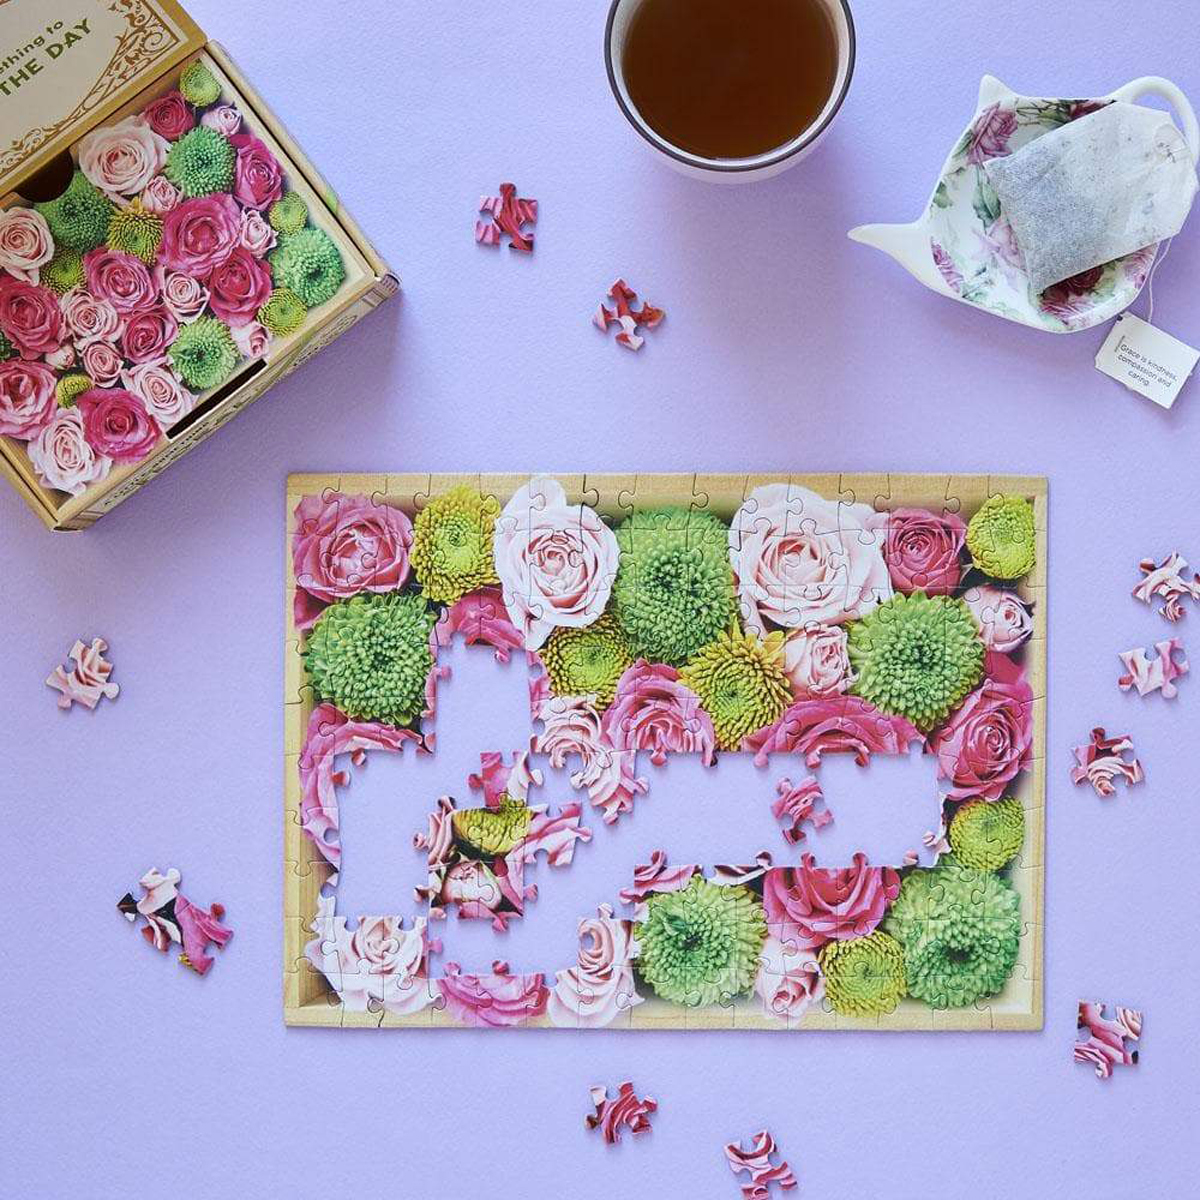 A Little Something Floral Mini Puzzle Flower & Garden Jigsaw Puzzle